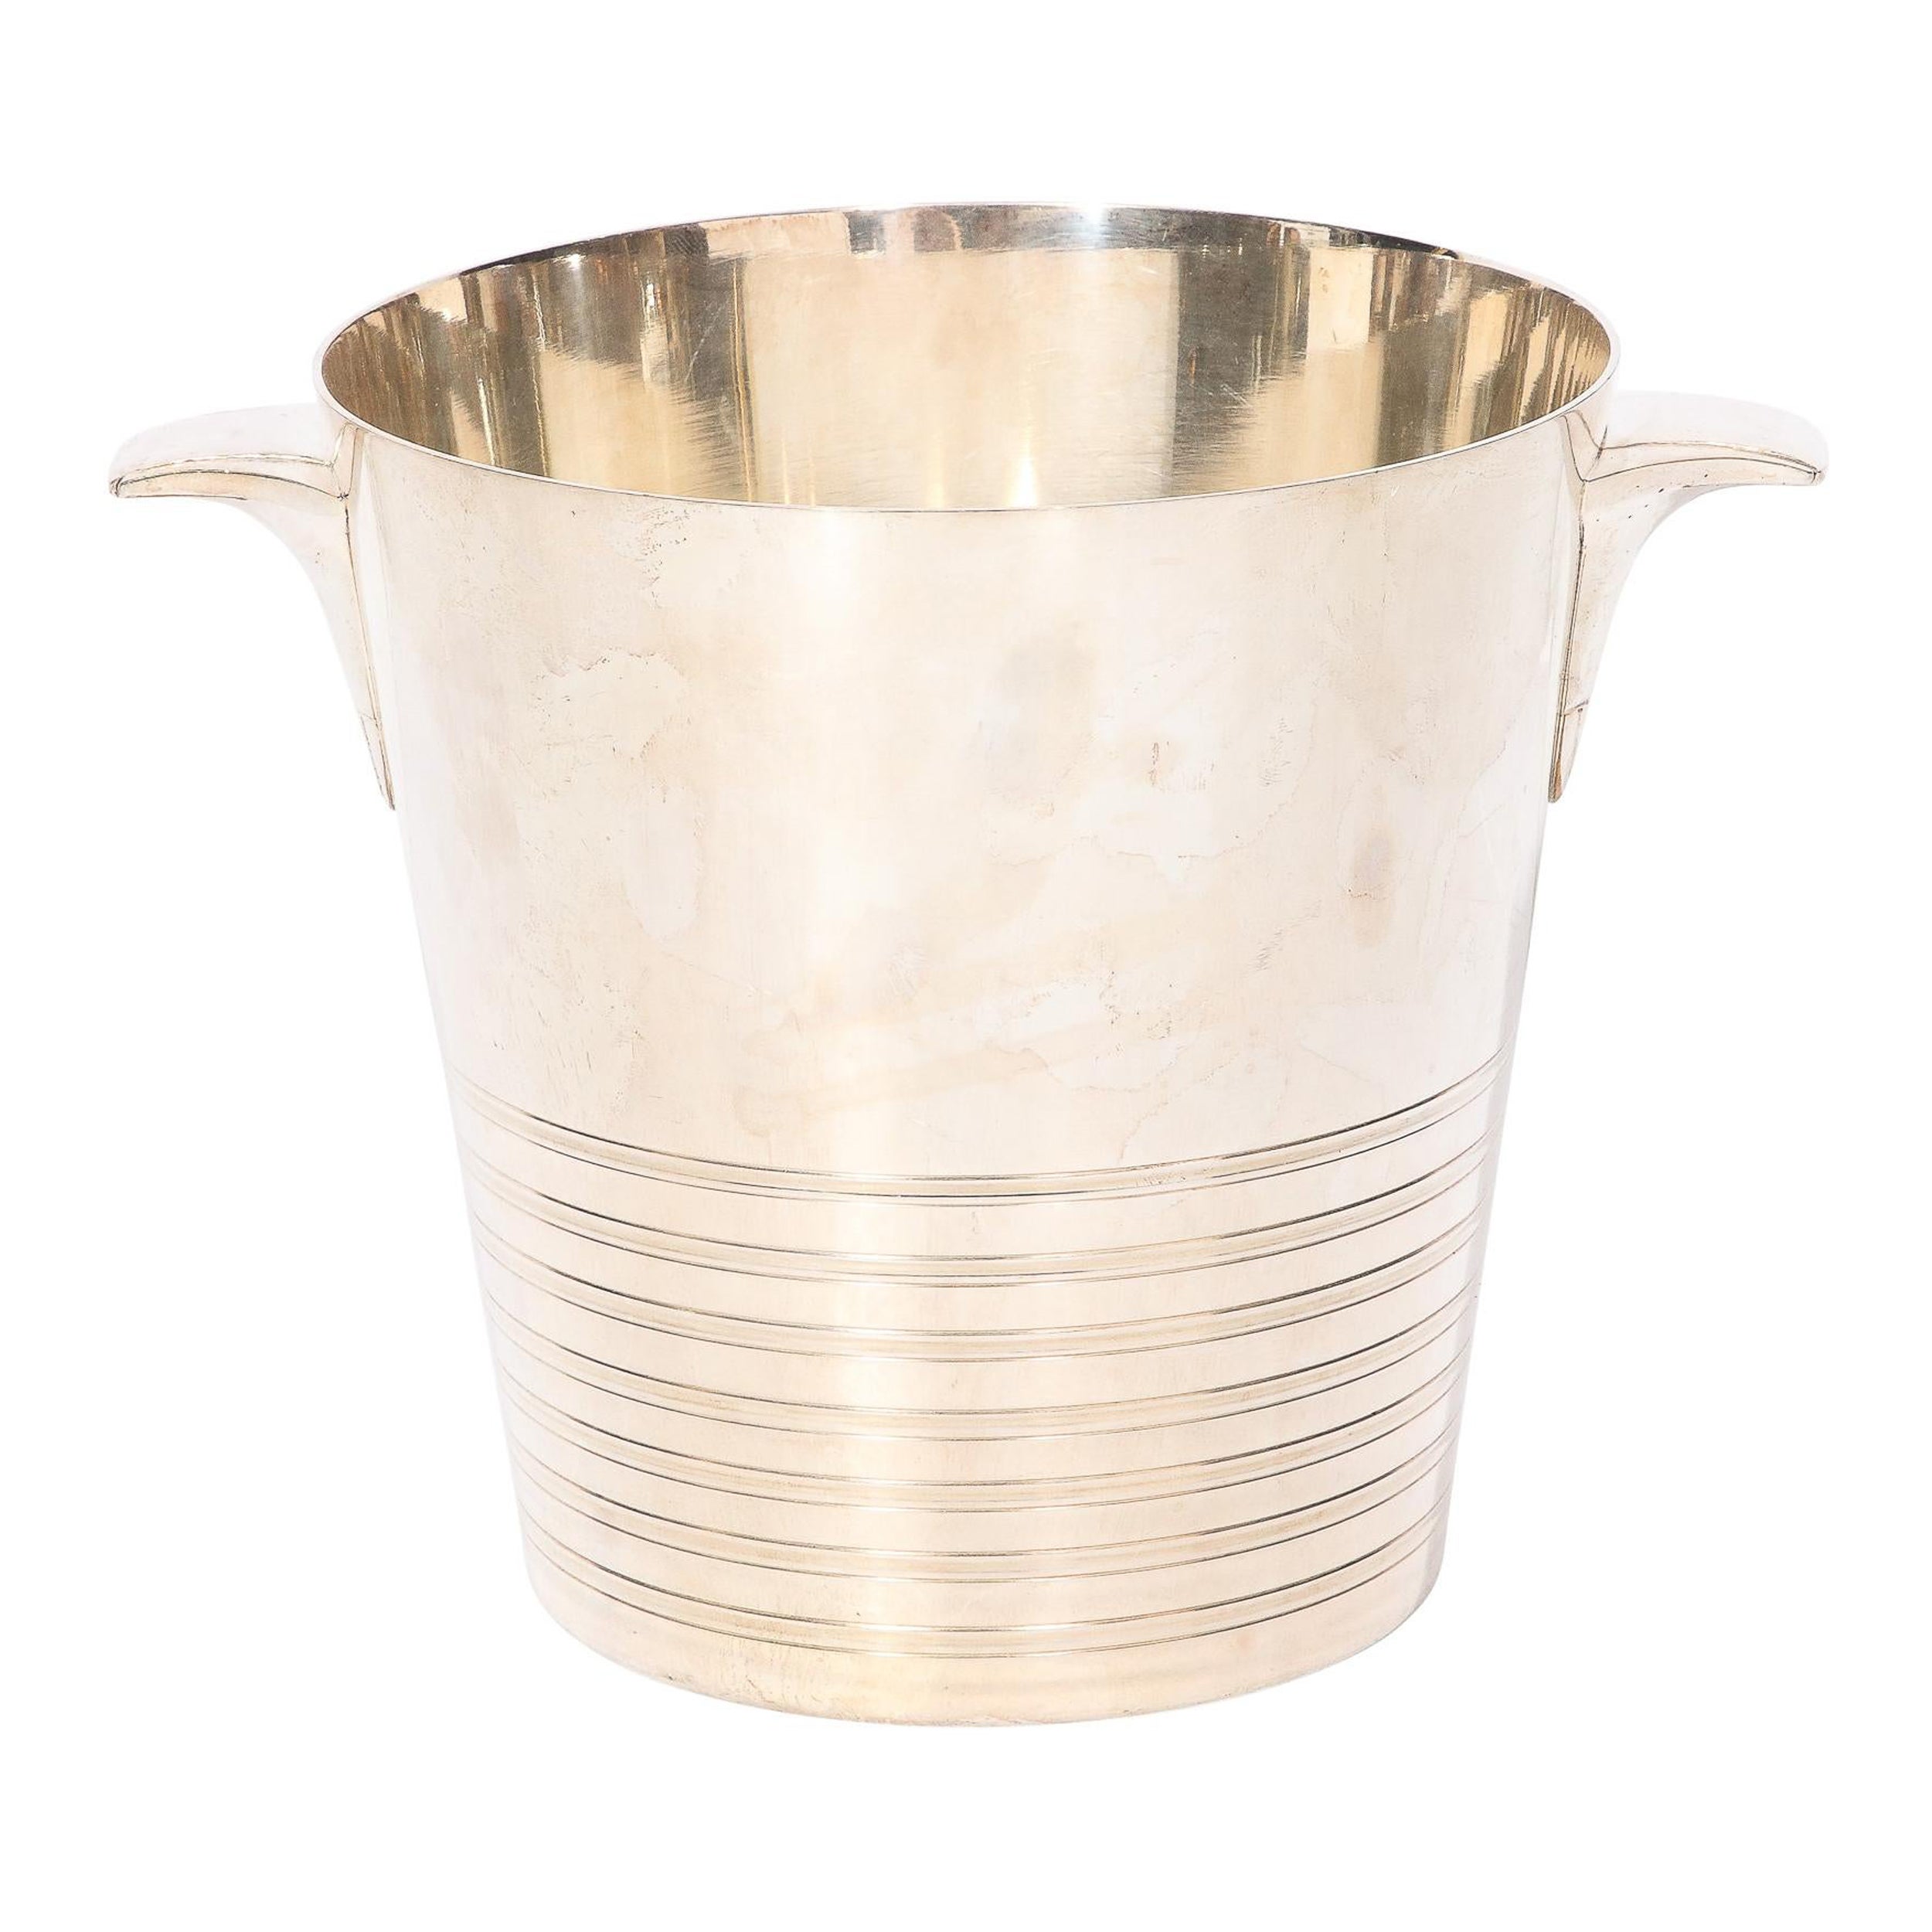 Art Deco Silver Plate Ice Bucket with Curved Handles and Banded Detailing For Sale